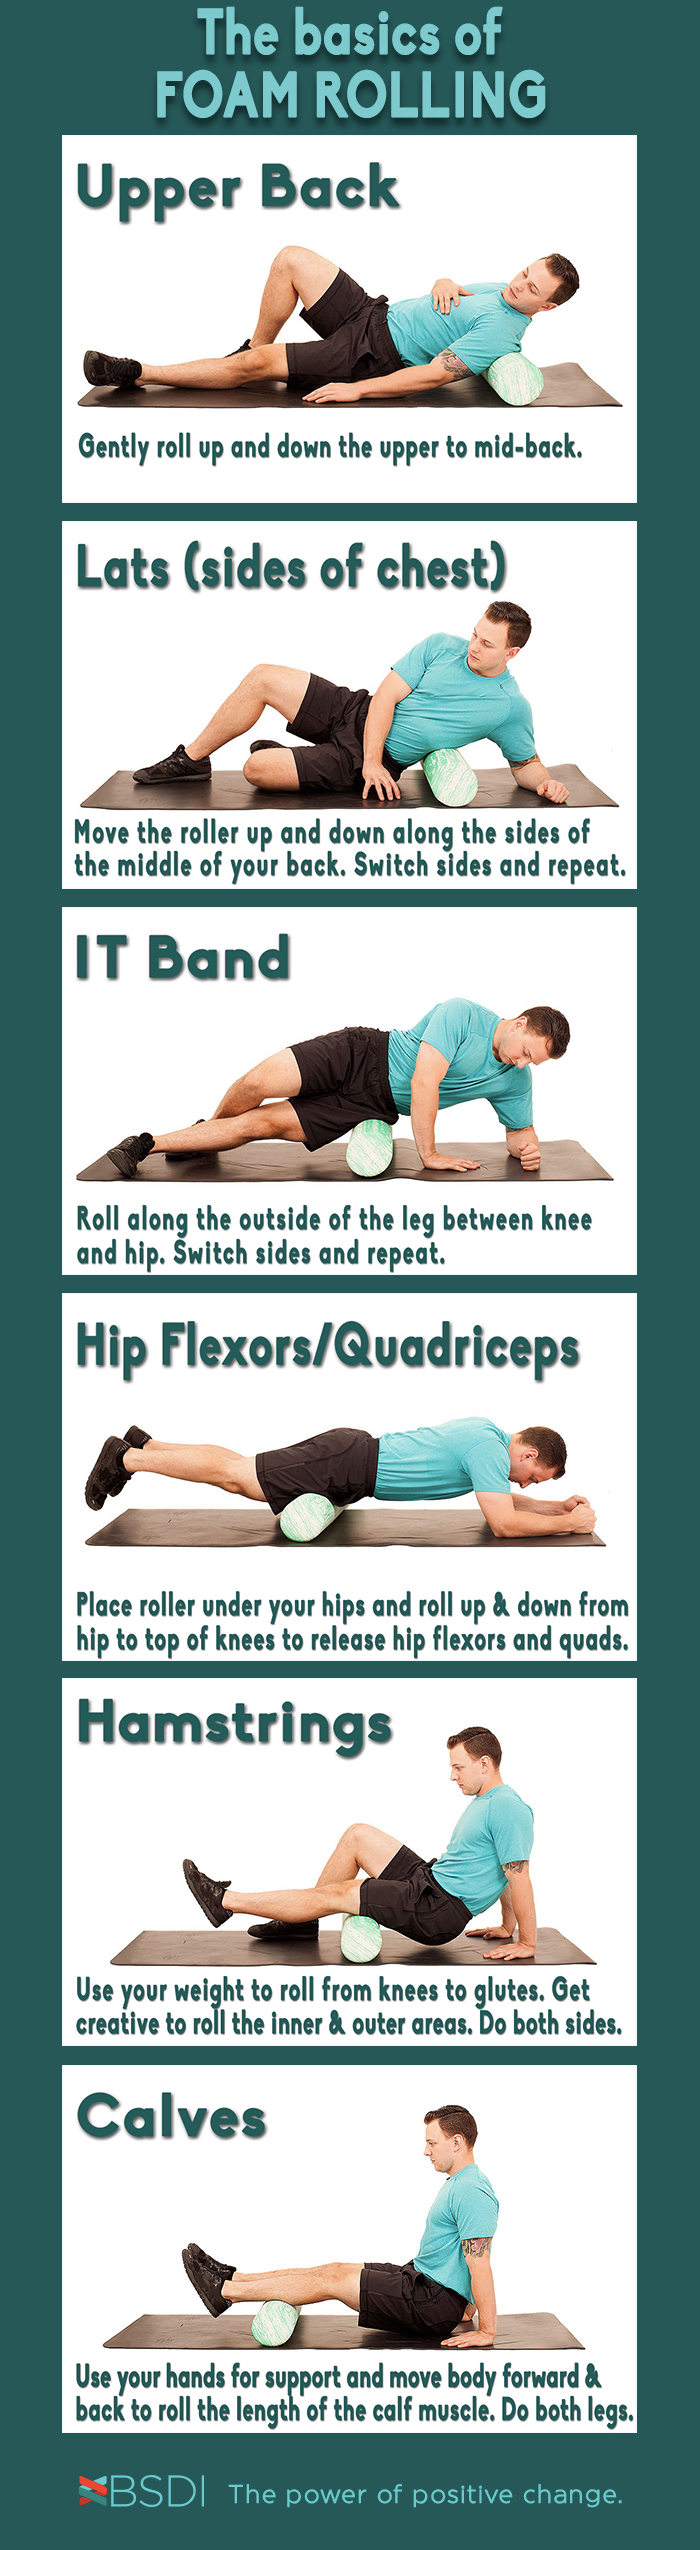 Why, When, and How to Use a Foam Roller